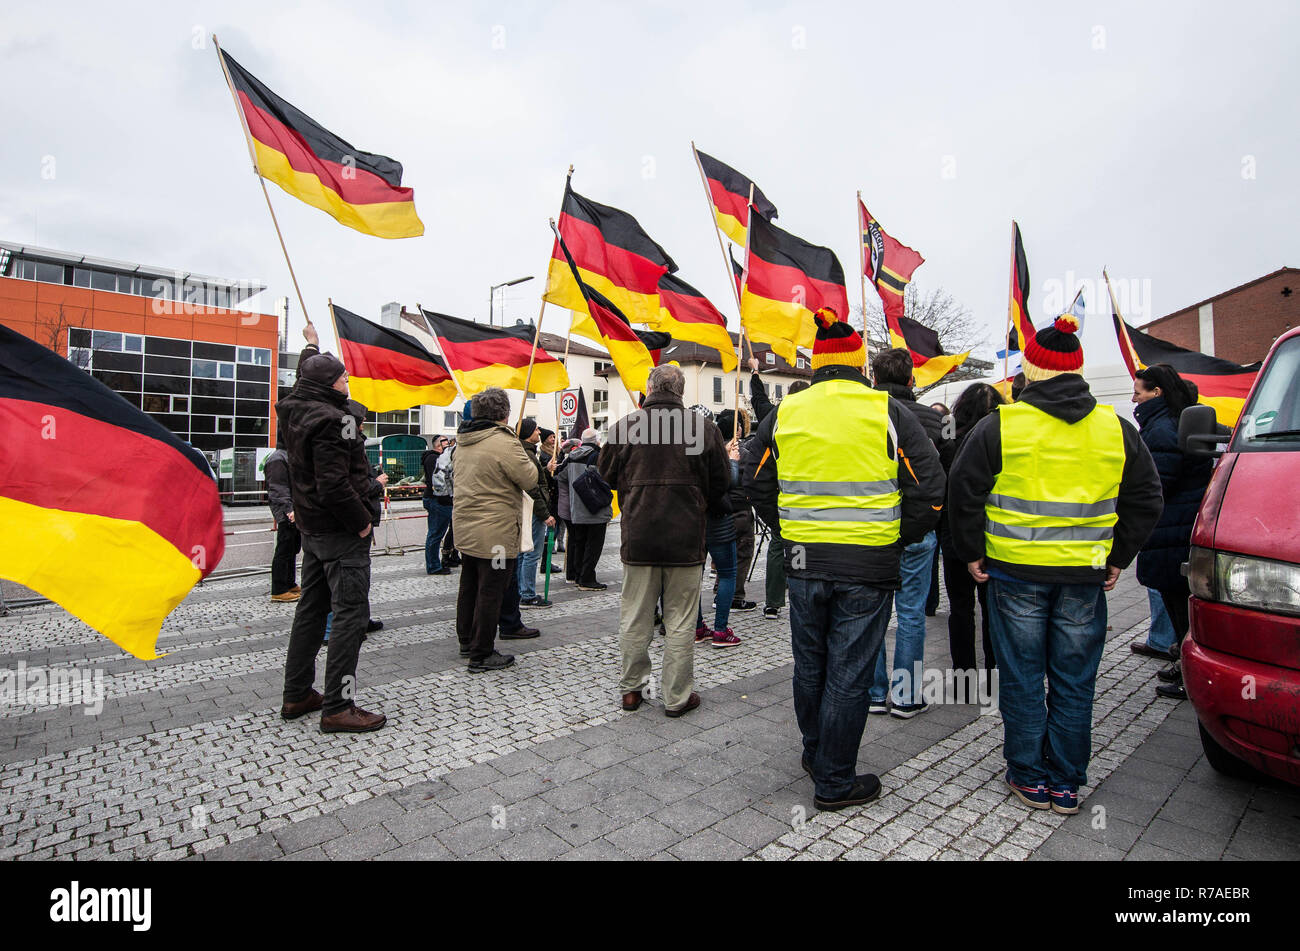 Munich, Bavaria, Germany. 8th December, 2018. Right-extremists and populists with Pegida demonstrate in front of the Dankeskirche in Munich's Milberthofen district. The Church is known for its stance against right-extremism. Pegida Dresden in Munich, the self-proclaimed original Pegida, organized a rally in the city's Milberthofen district in front of the Dankeskirche (Thanks Church) of Munich. Headed by Michael Stuerzenberger, the group rallied against the United Nations Migration Pact. Cred Credit: ZUMA Press, Inc./Alamy Live News Stock Photo